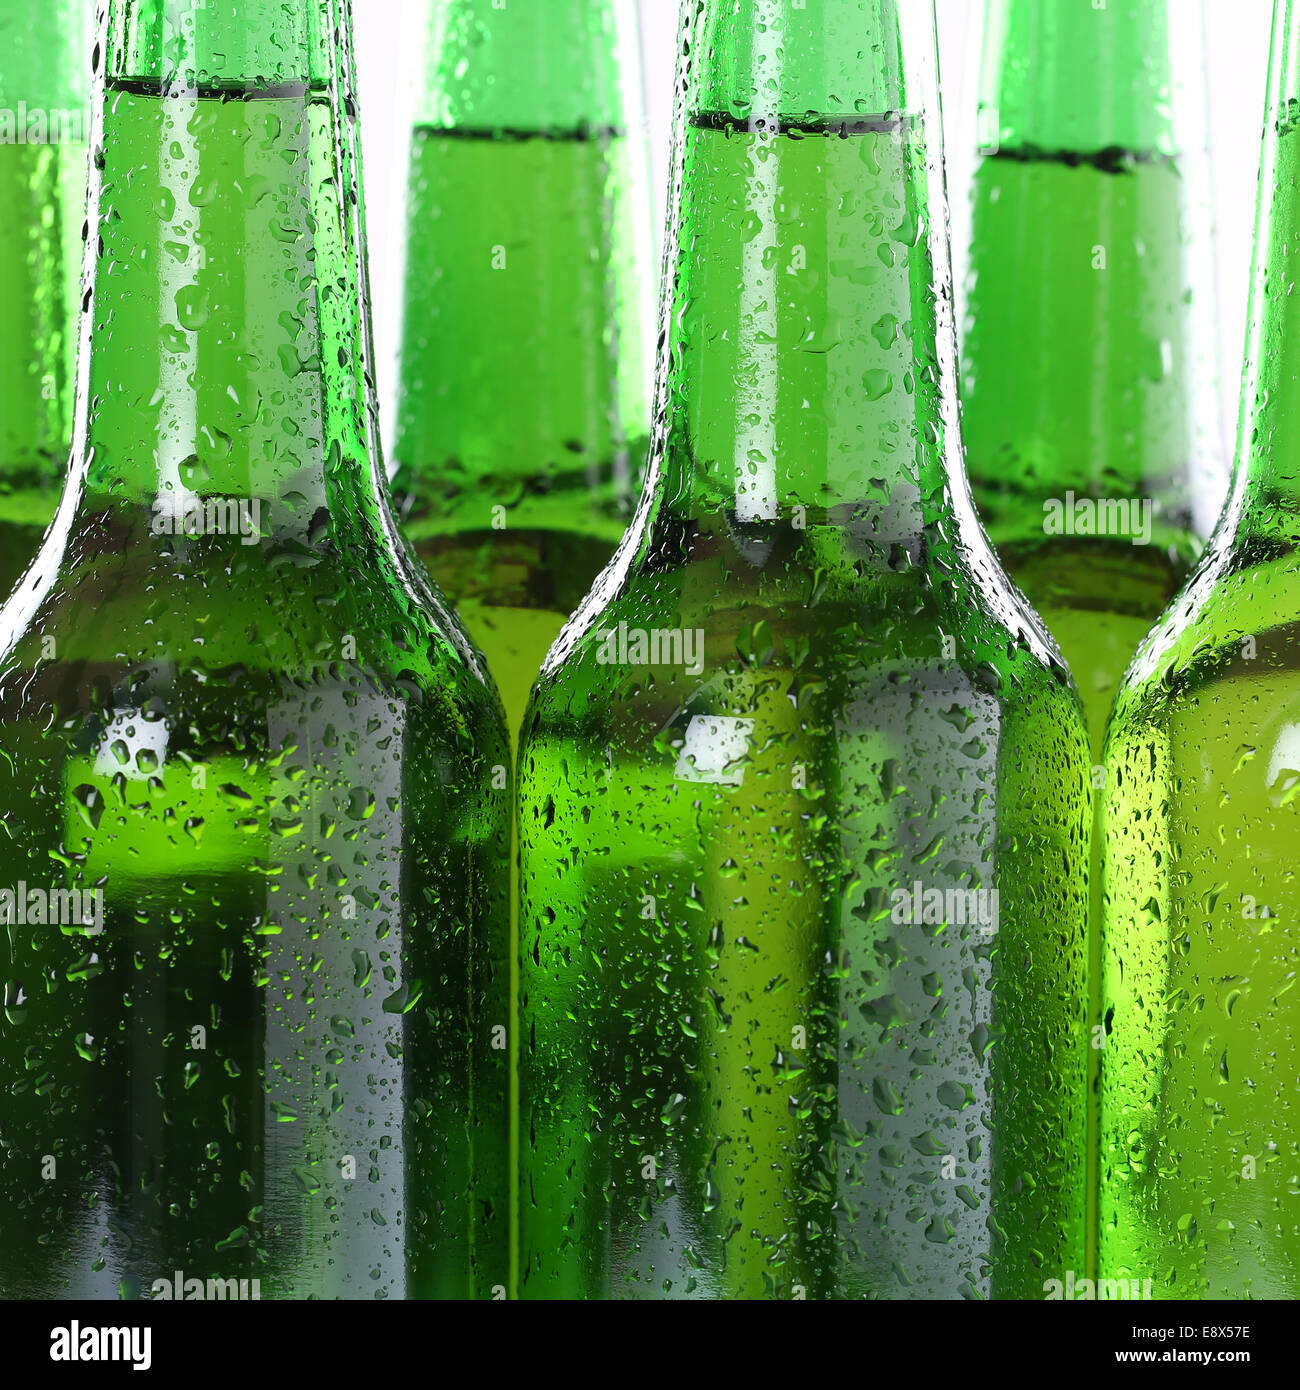 Cold alcohol beer drinks in bottles with water drops Stock Photo